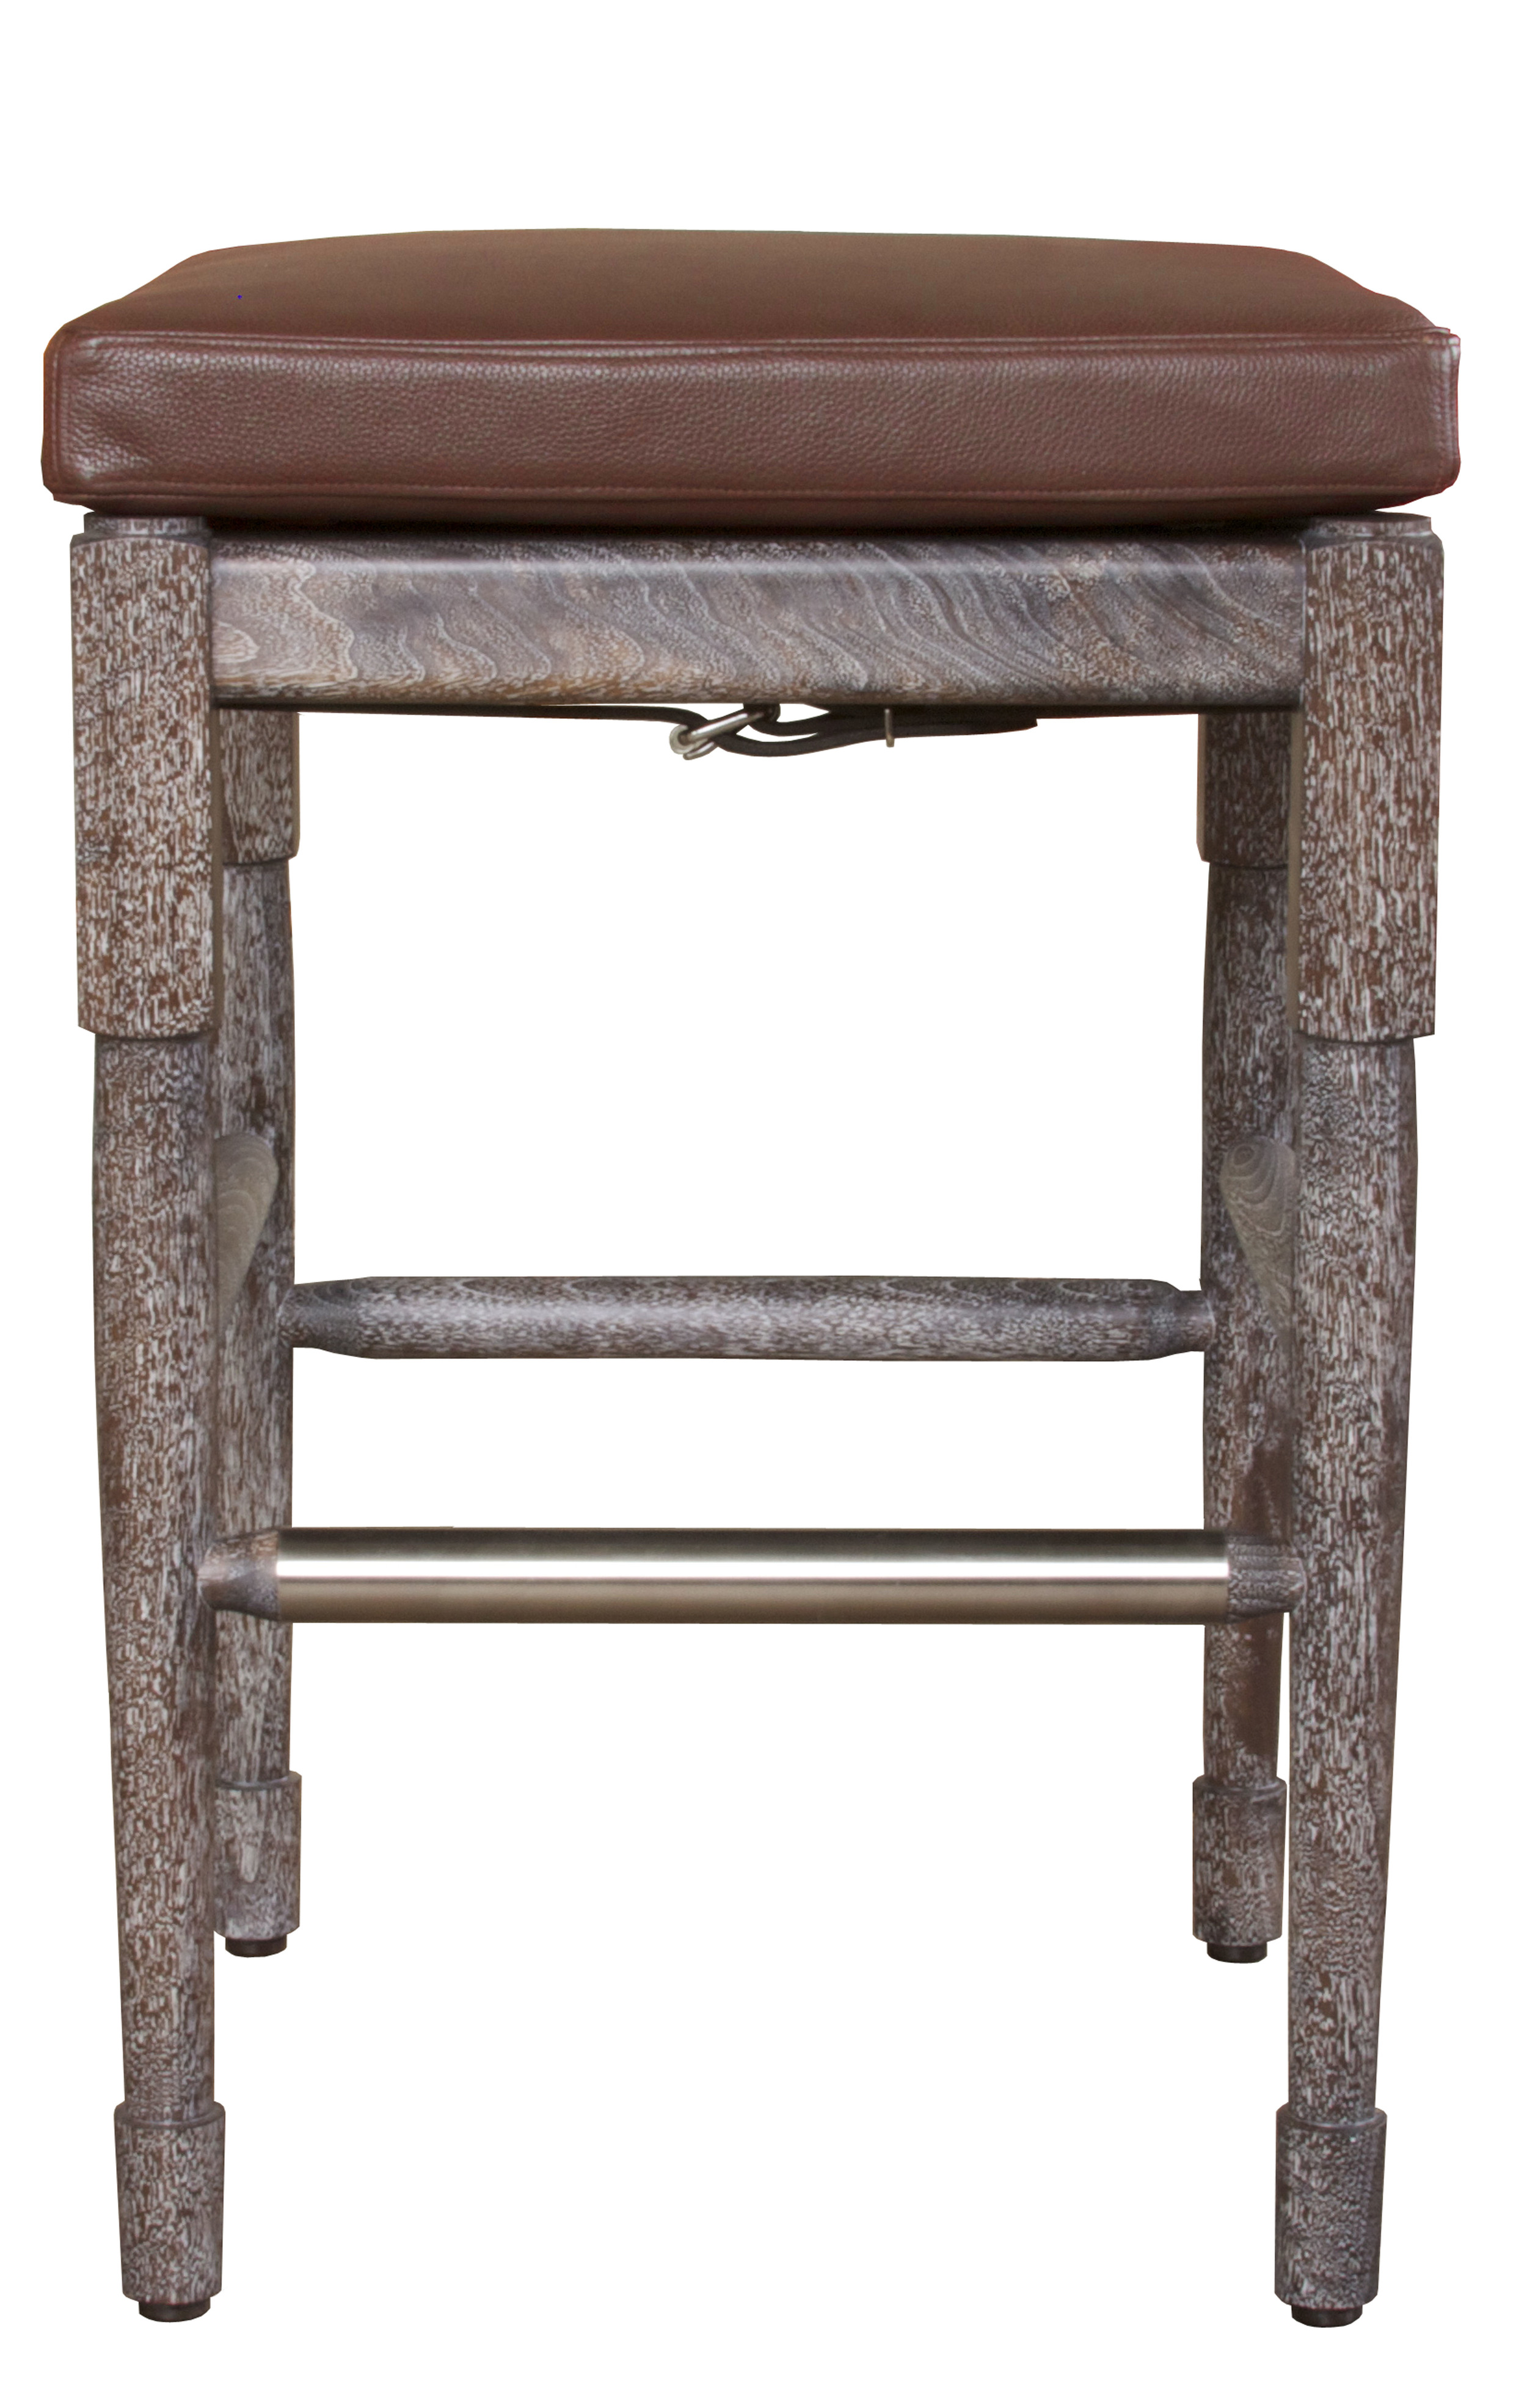 Chatwin Stool - Bar, Counter, or Dining